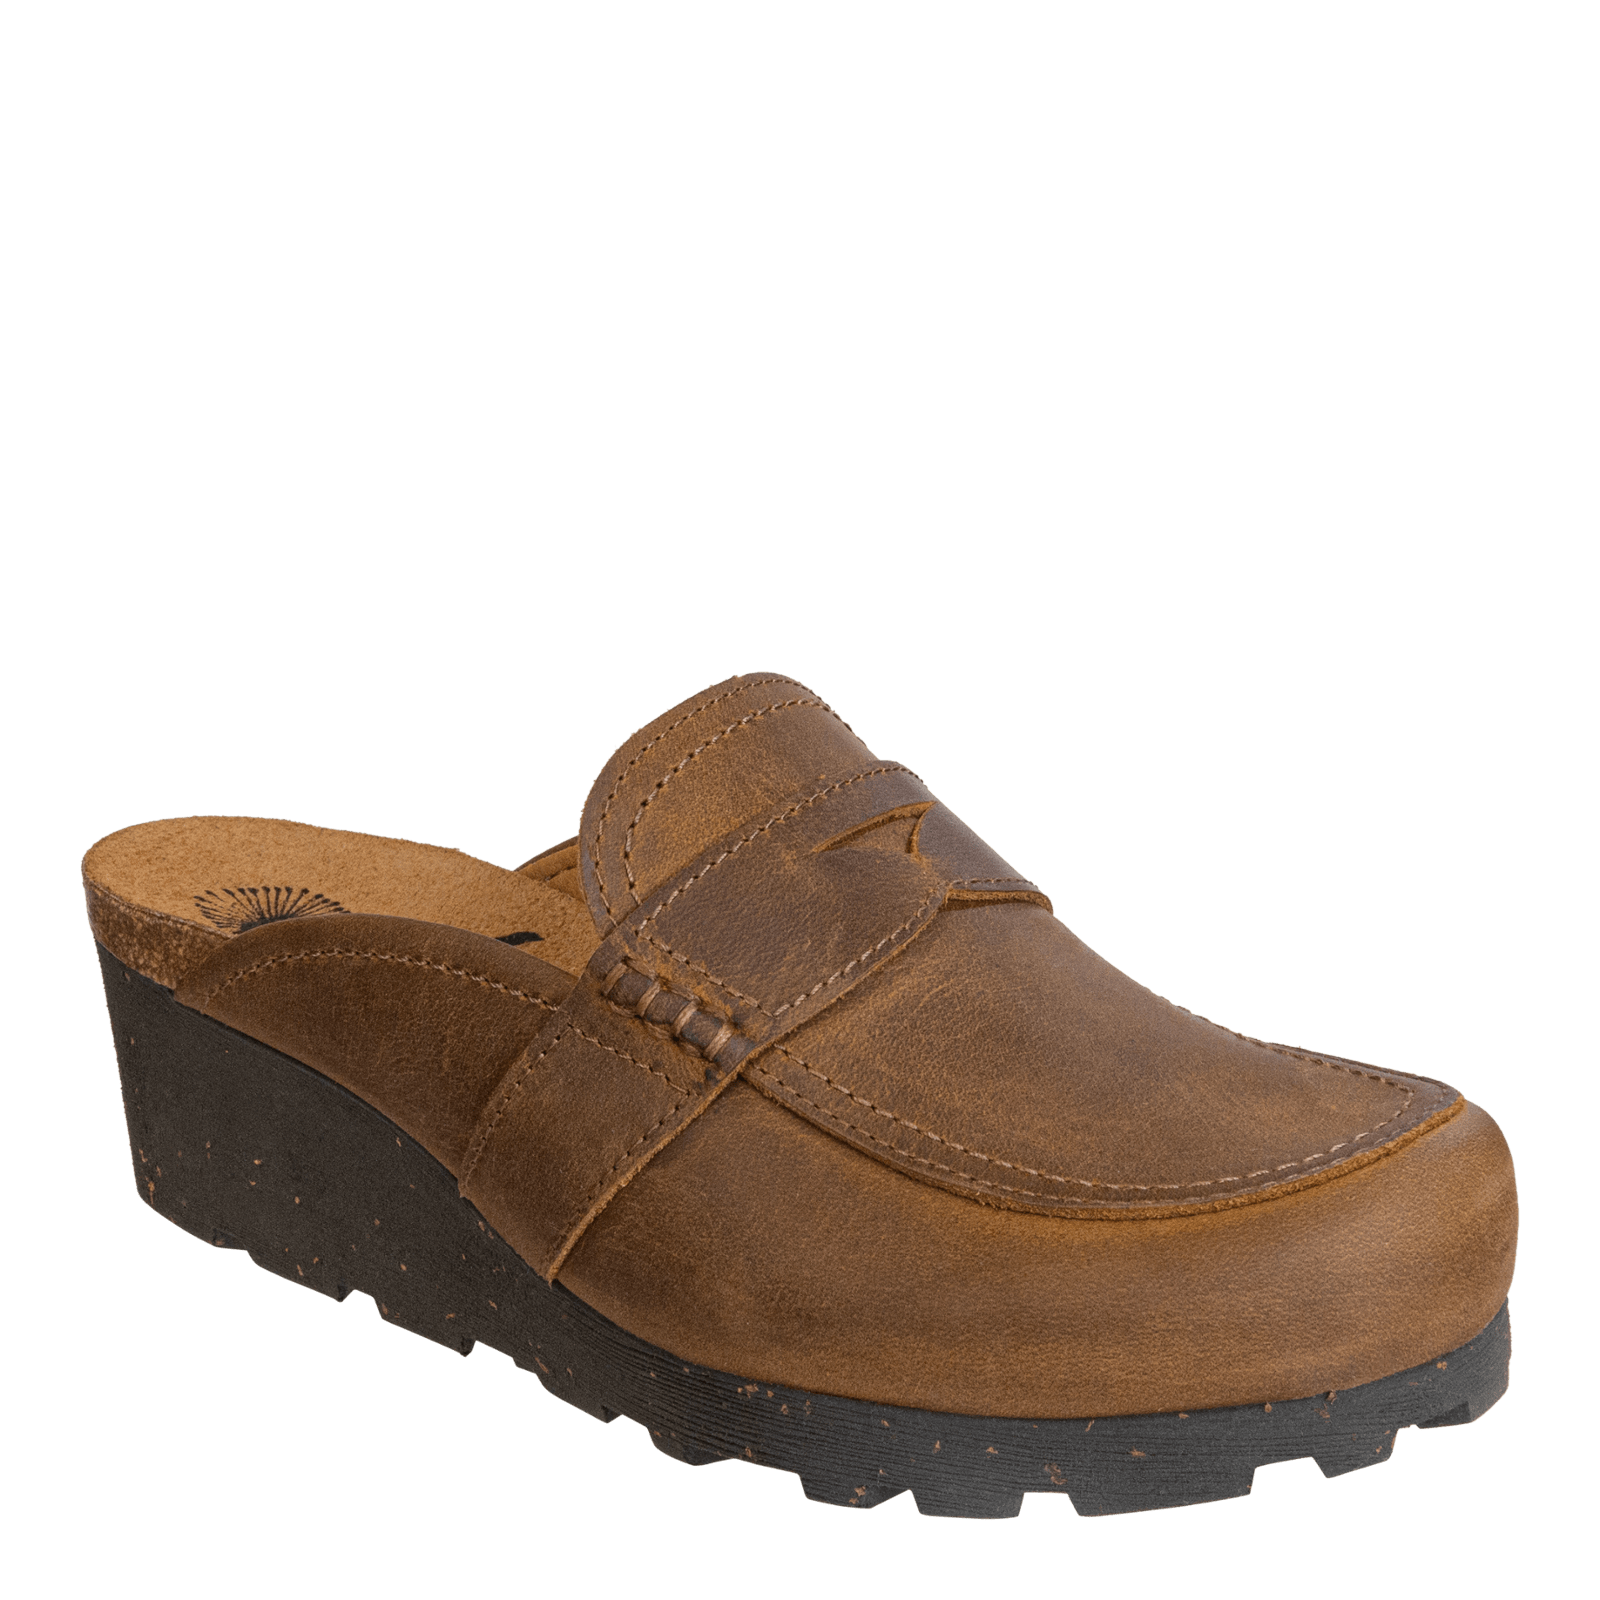 HOMAGE in BROWN Wedge Clogs - OTBT shoes